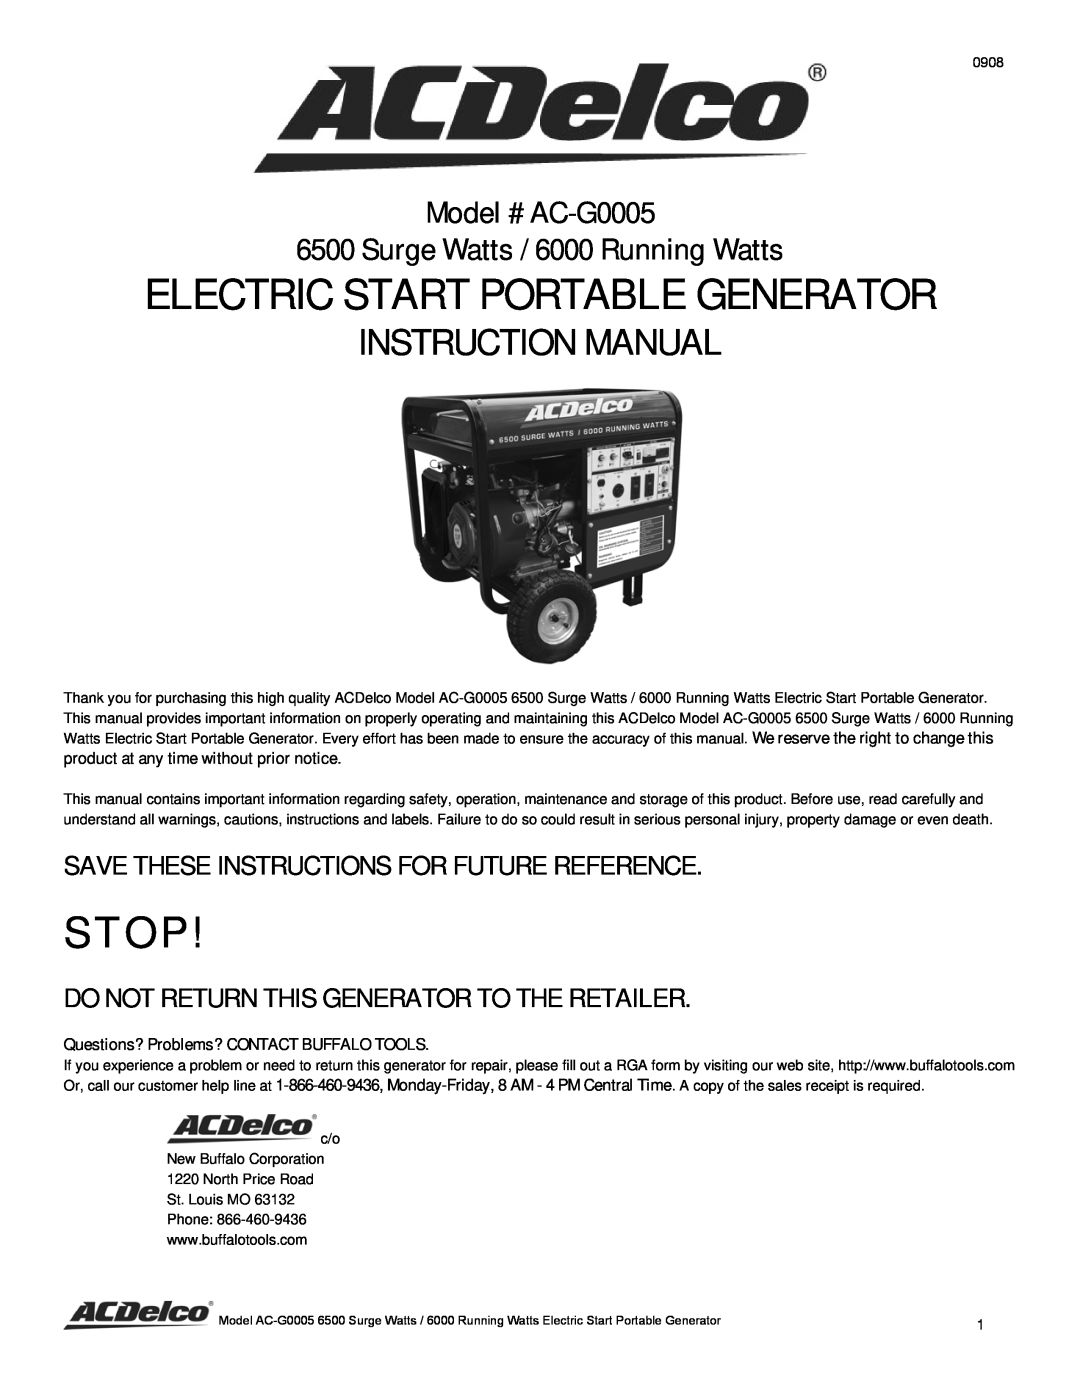 ACDelco AC-G0005 instruction manual Stop, Save These Instructions For Future Reference, Electric Start Portable Generator 